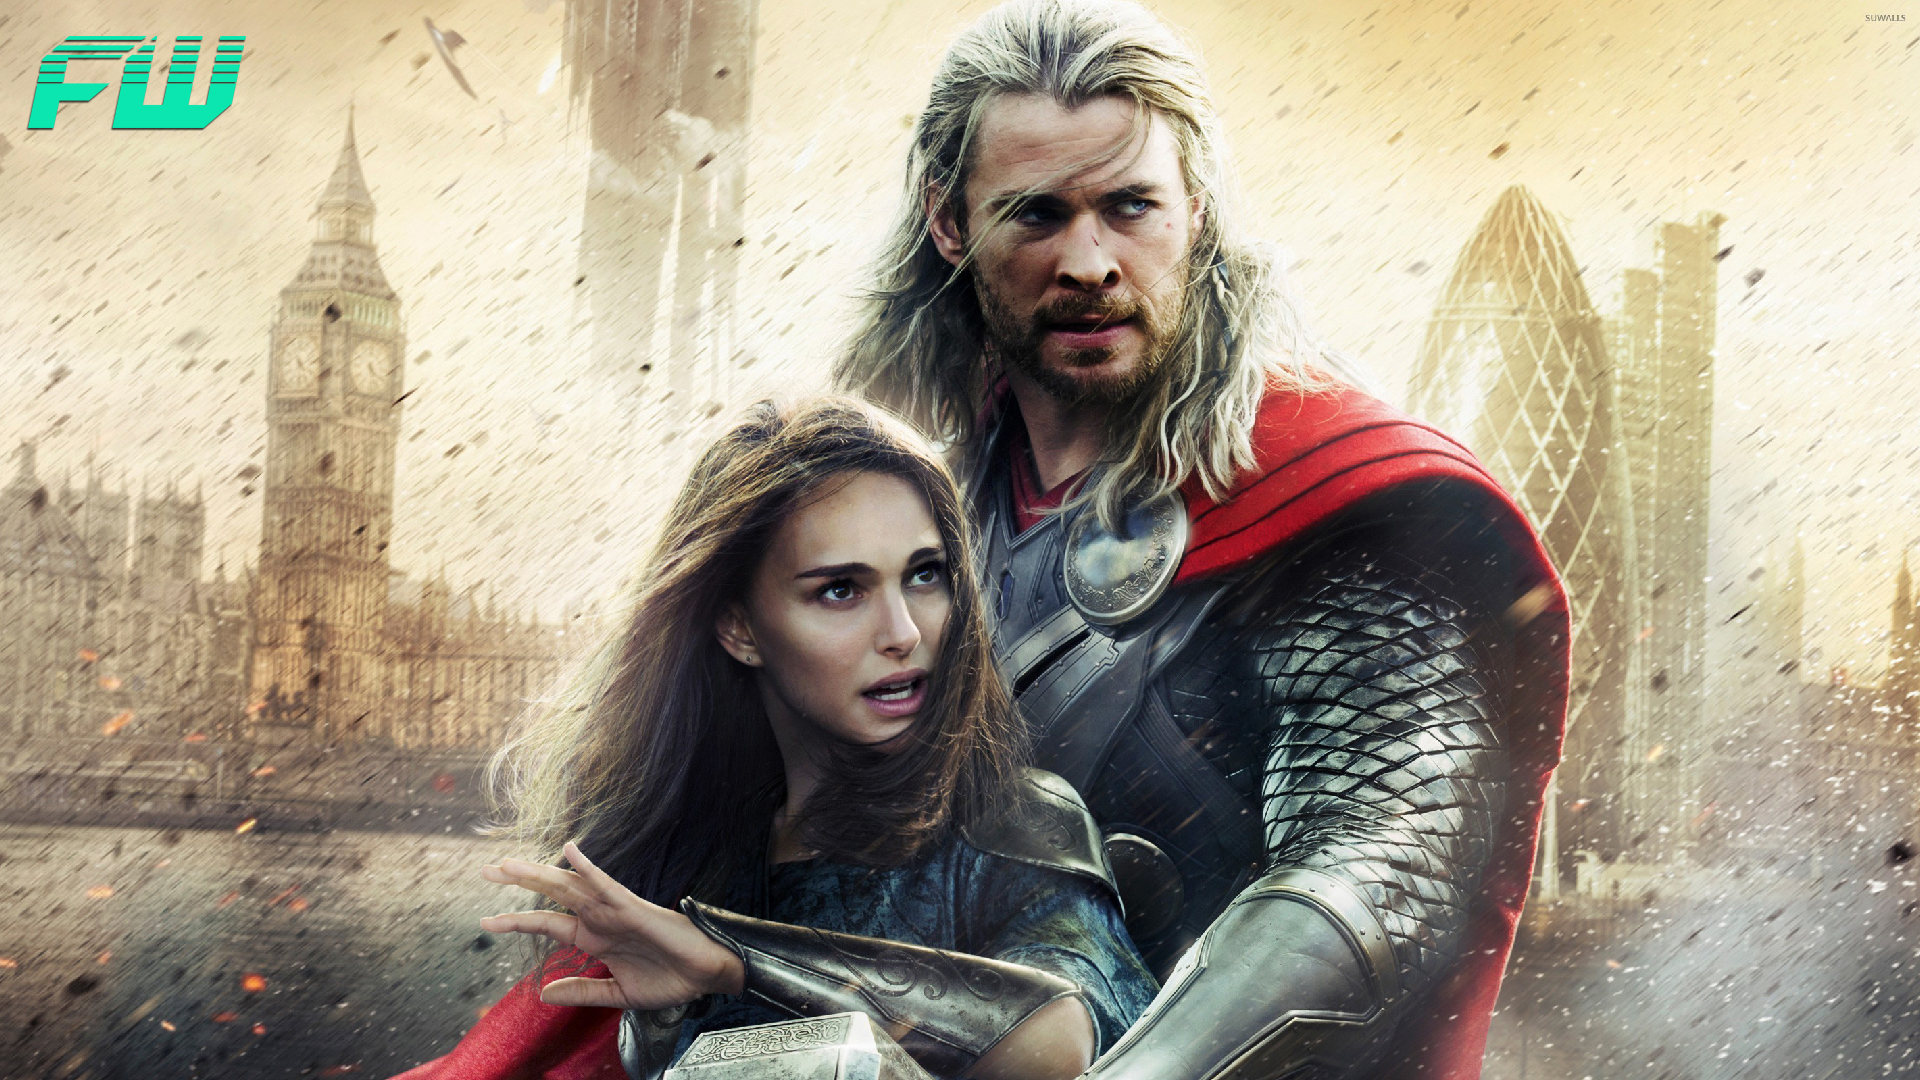 Early 'Thor: Ragnarok' Concept Art Had a Very Different Look for Thor